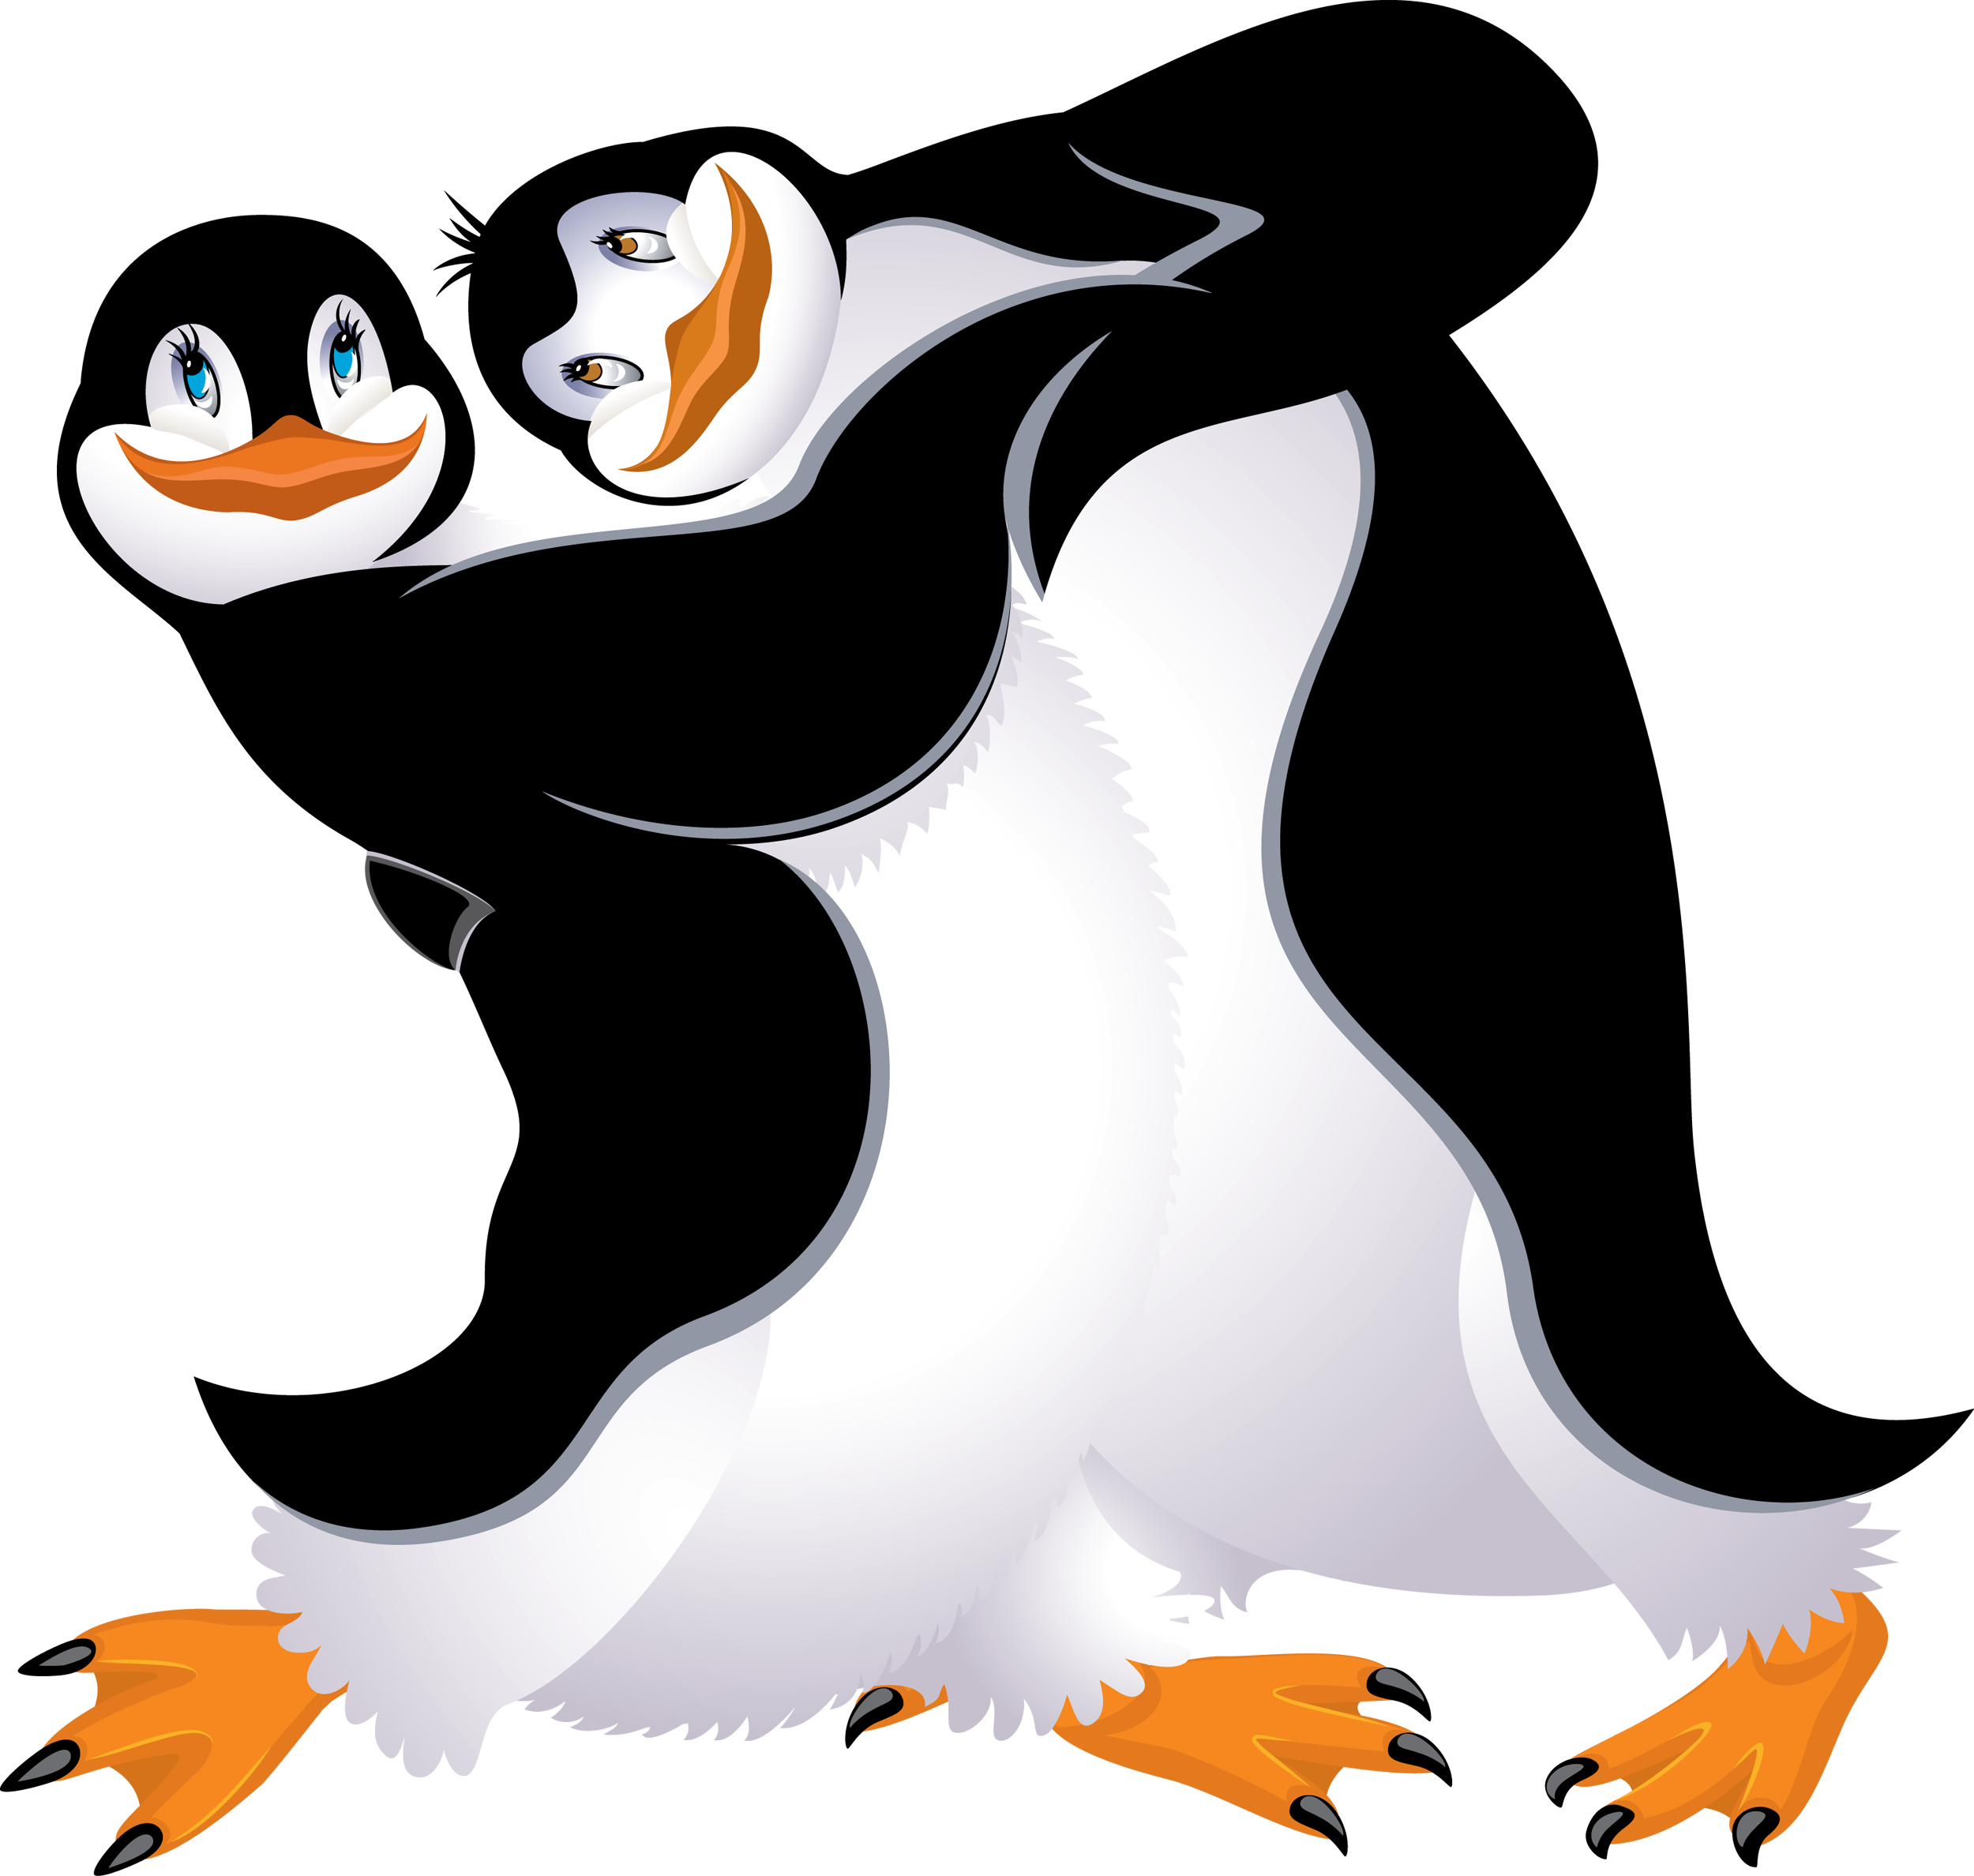 Penguin Cartoon Bird Clip Art Images Are Free To Use - Dancing Penguins Clipart (2500x2376)